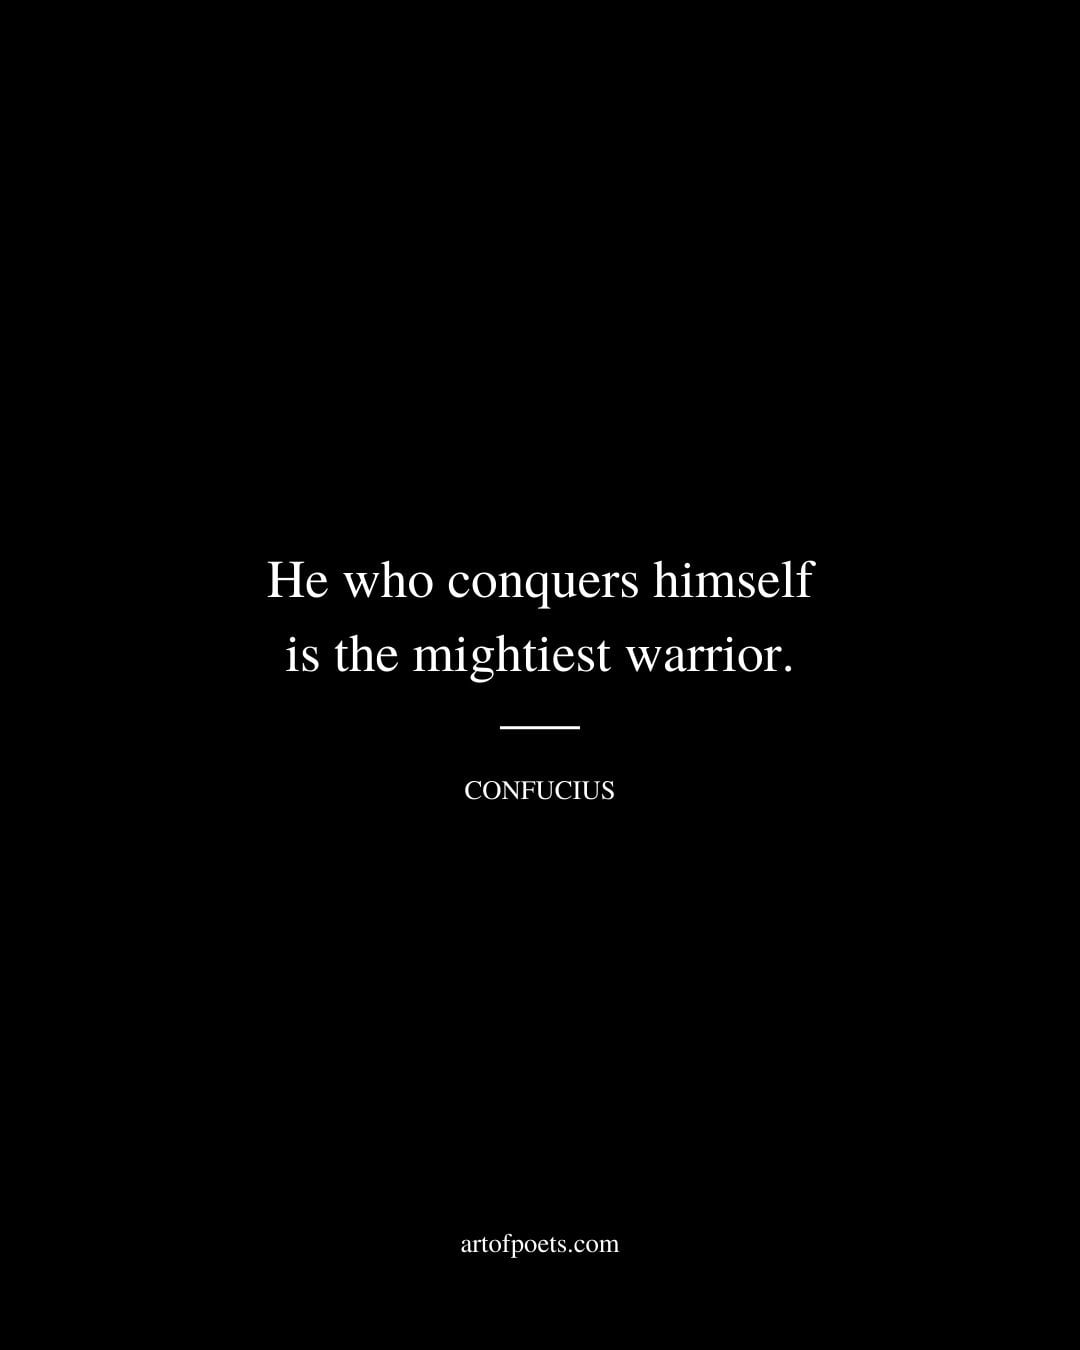 He who conquers himself is the mightiest warrior